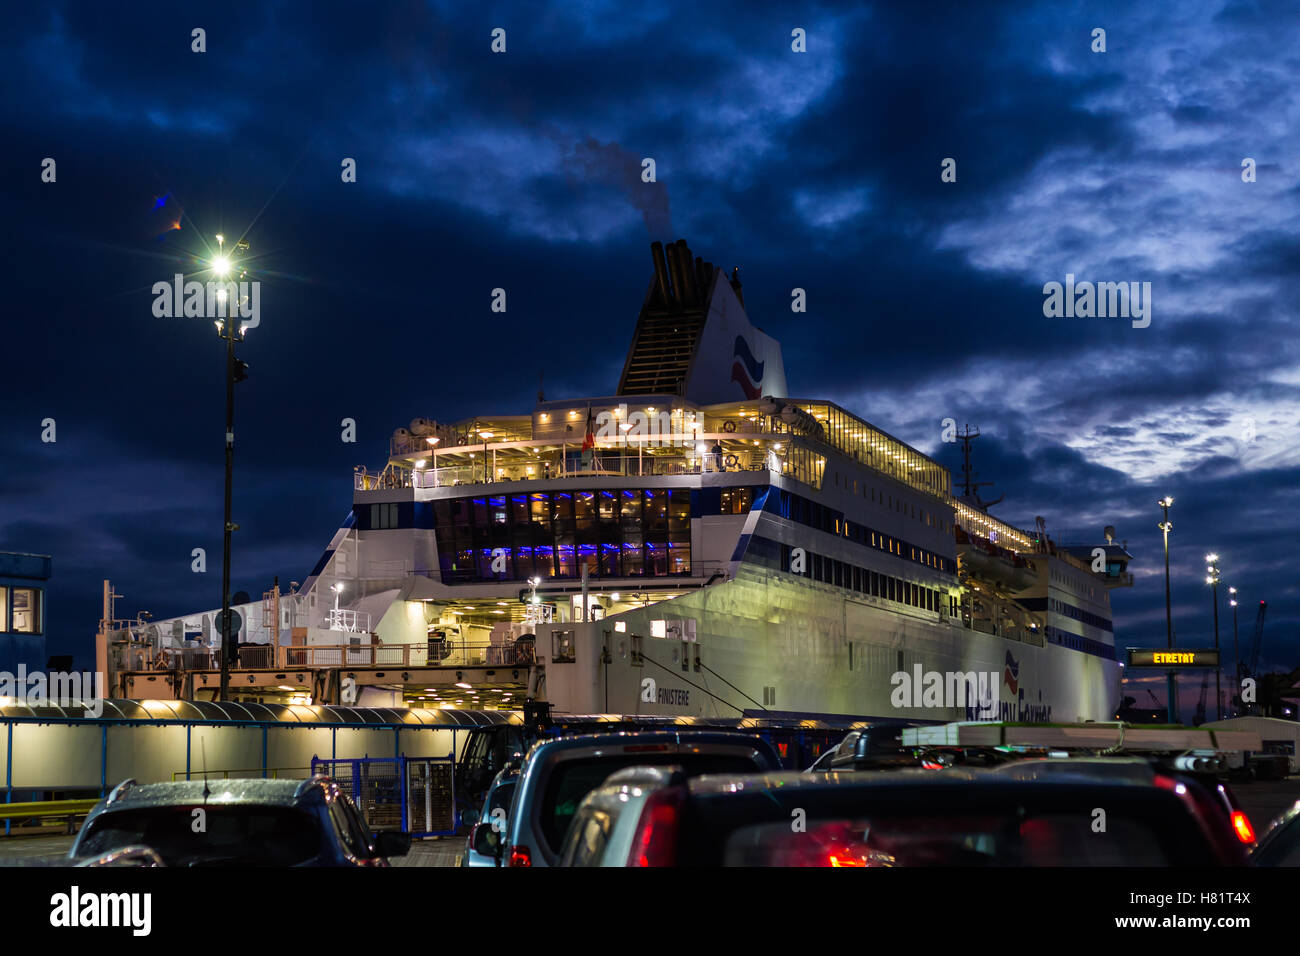 Cars waiting to board ferry in port at night Stock Photo